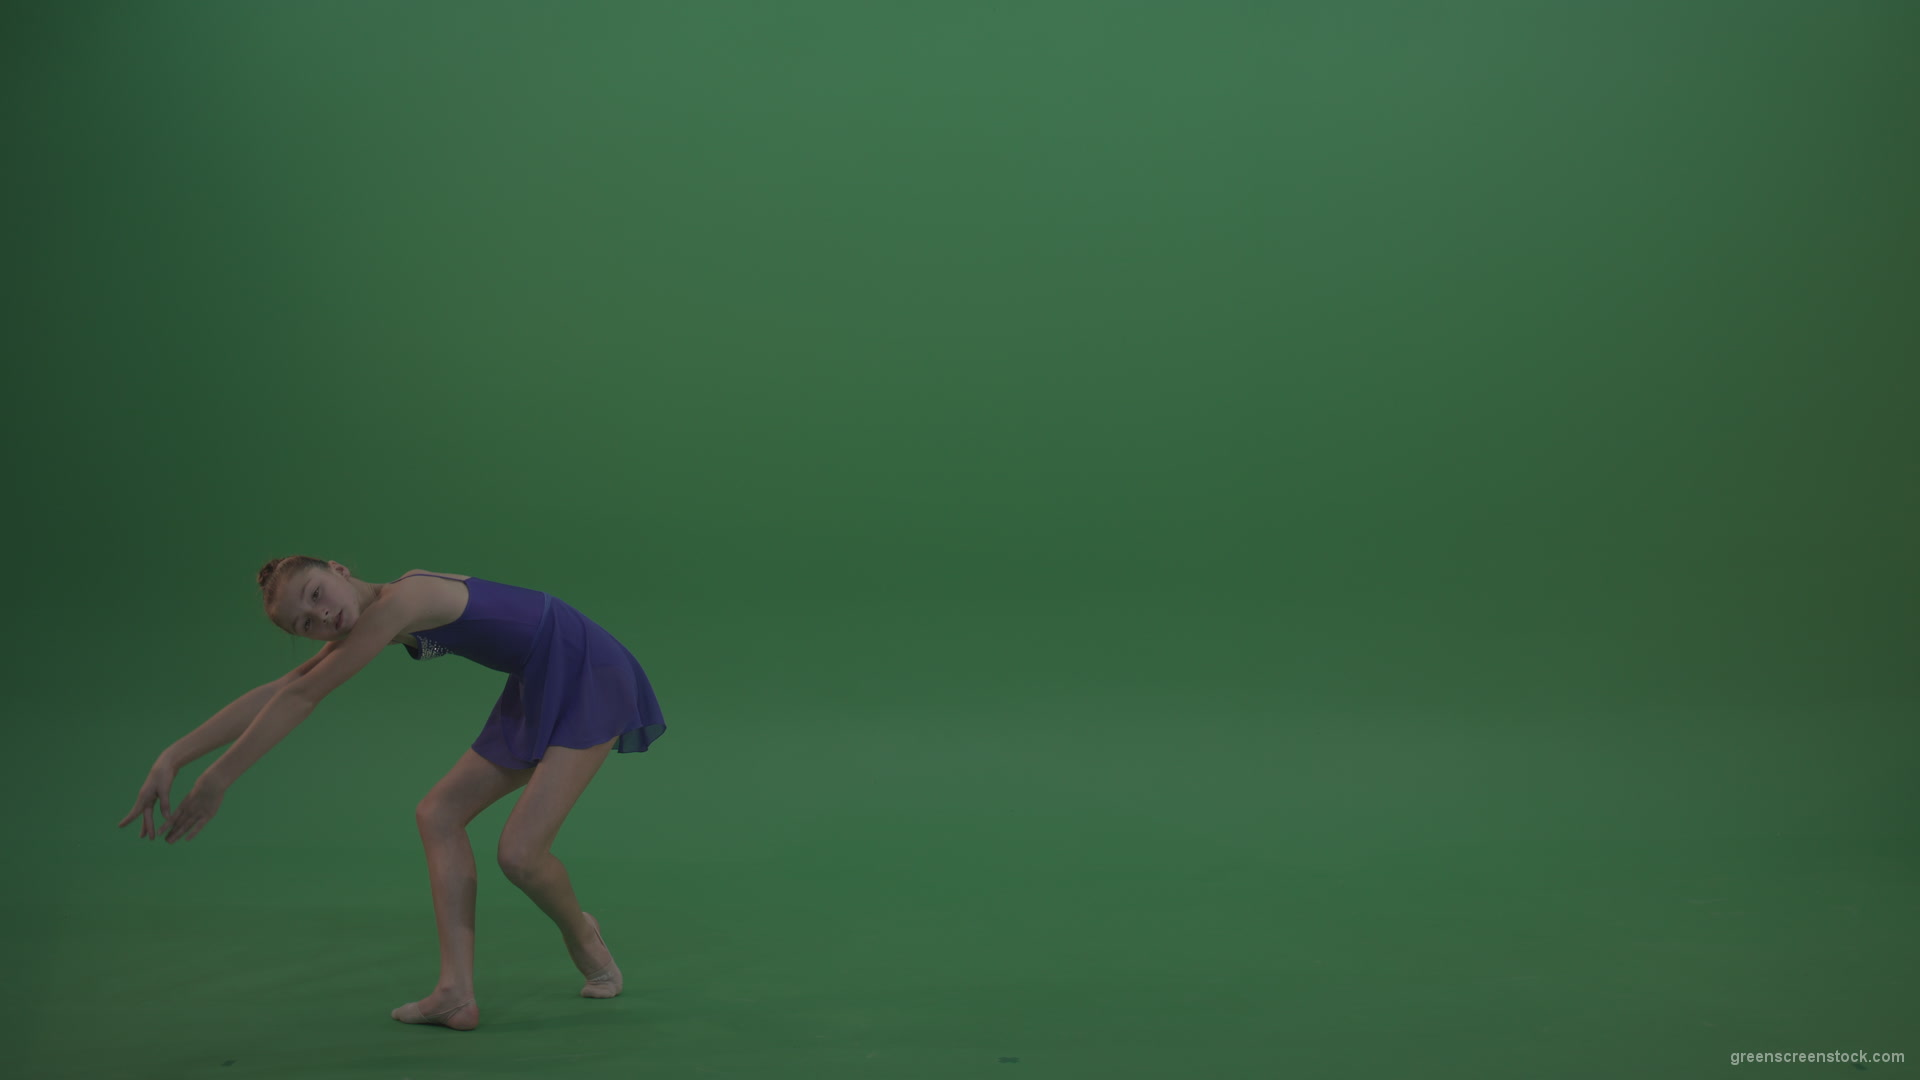 Young_Gymnast_Showing_Marvelous_Technical_Dance_Swan_Ballet_Moves_Technical_Performance_Of_Rhythmic_Artistic_Gymnastics_On_Green_Screen_Wall_Background_009 Green Screen Stock